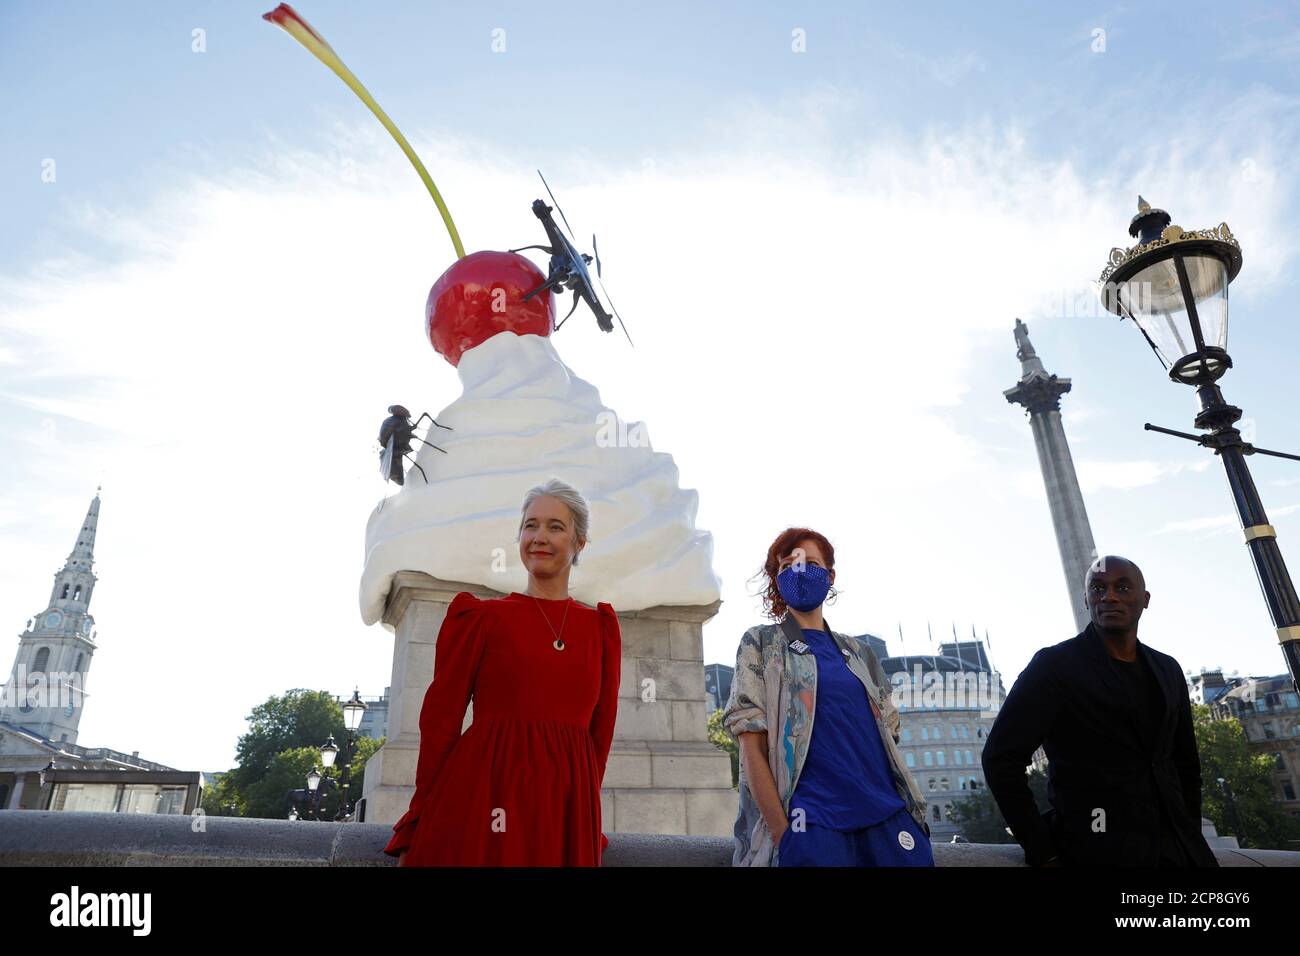 Deputy Mayor for Culture and Creative Industries Justine Simons OBE, Artist Heather Phillipson and Chair of the Fourth Plinth Comissioning Group Ekow Eshun pose next to Phillipson's sculpture ''THE END'', after it was unveiled on Trafalgar Square's Fourth Plinth, in London, Britain, July 30, 2020. REUTERS/John Sibley Stock Photo